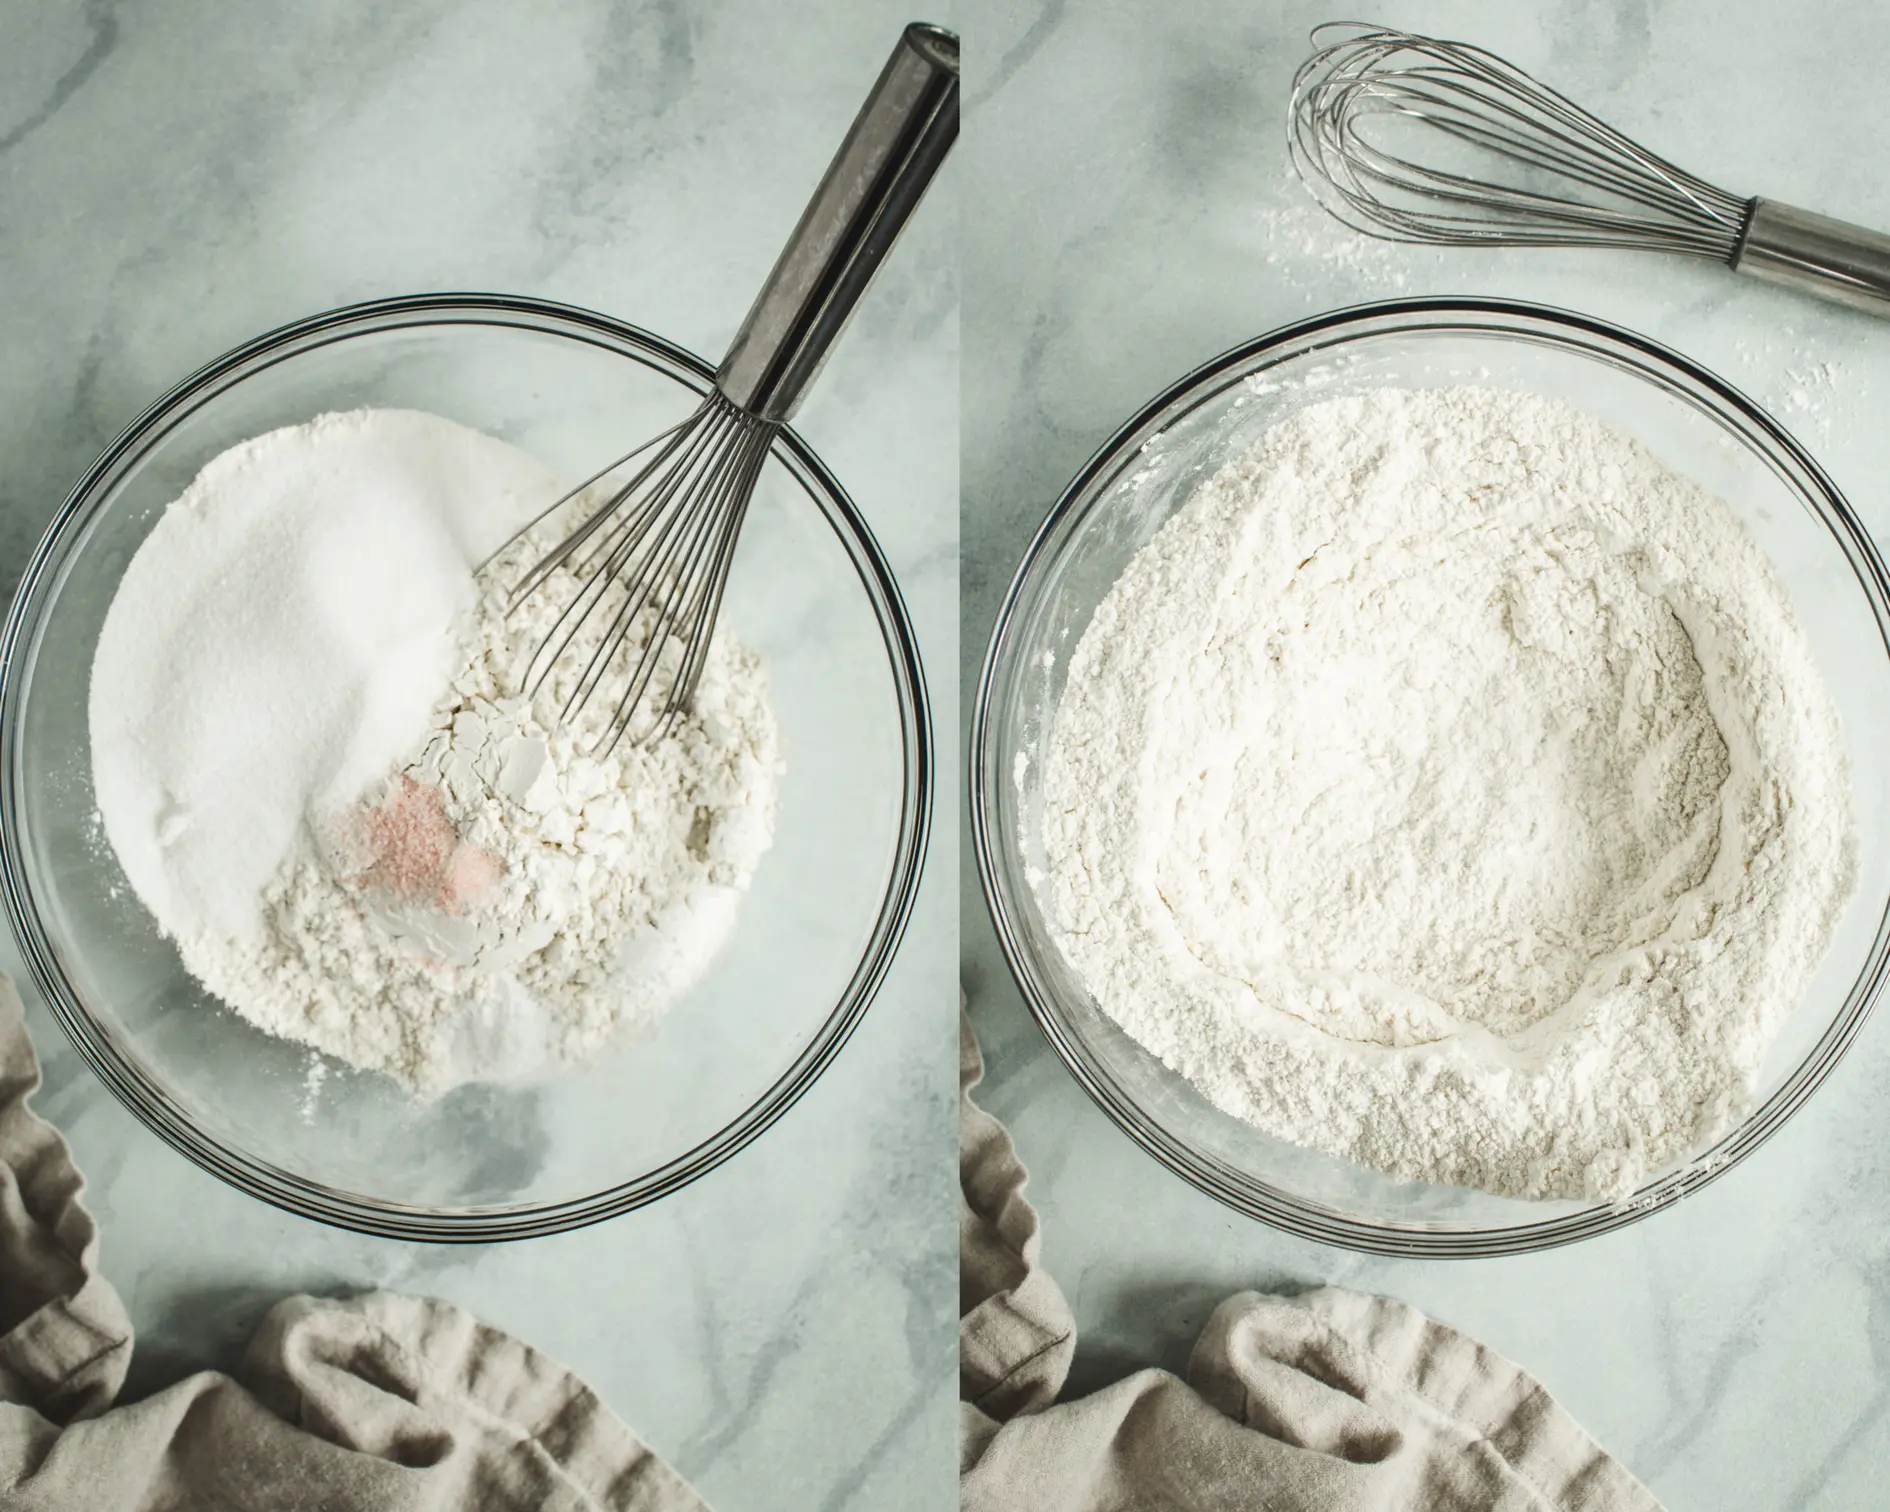 Dry ingredients in mixing bowl on left with whisk and dry ingredients in mixing bowl on right.